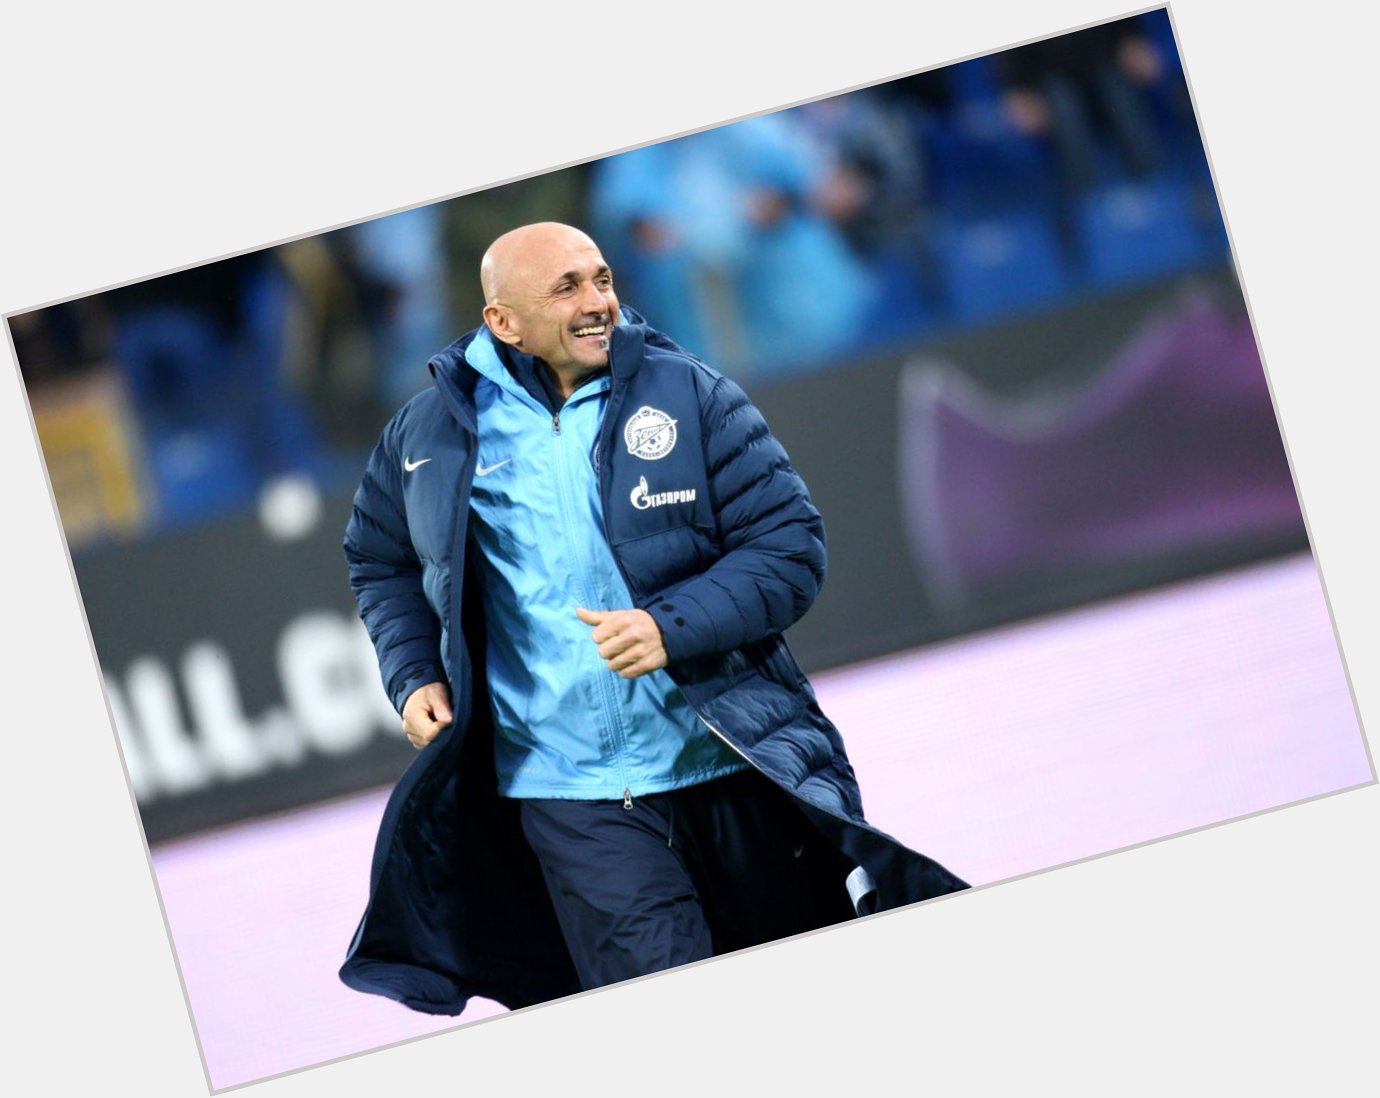 Big happy birthday wishes to former Zenit Boss Luciano Spalletti! Have a great day! 